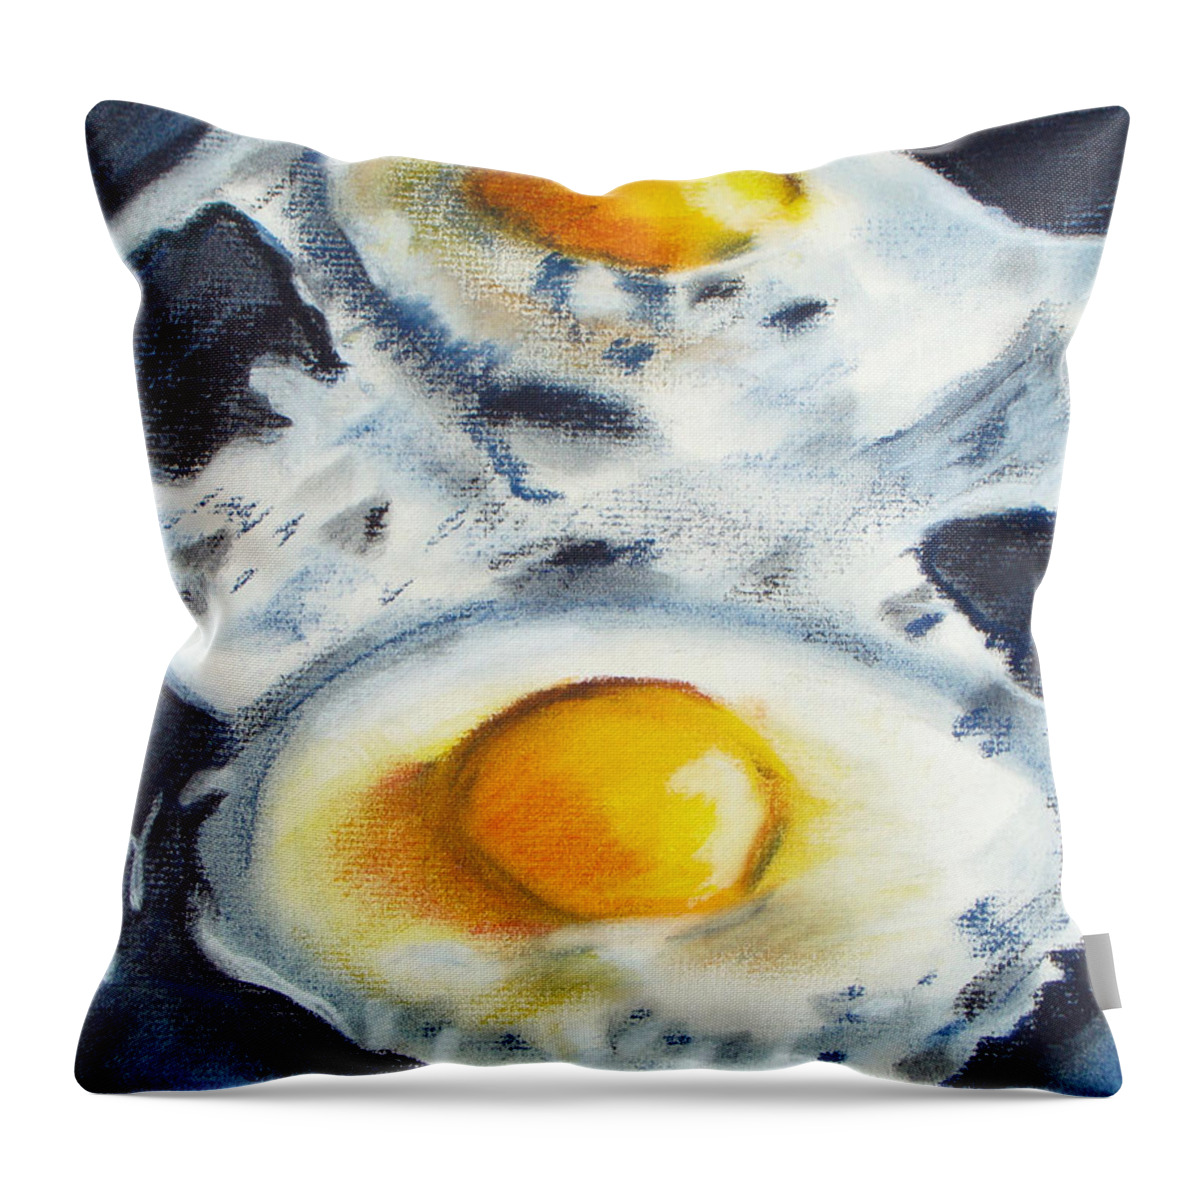 Pastel Throw Pillow featuring the painting Fried Eggs by Michael Foltz